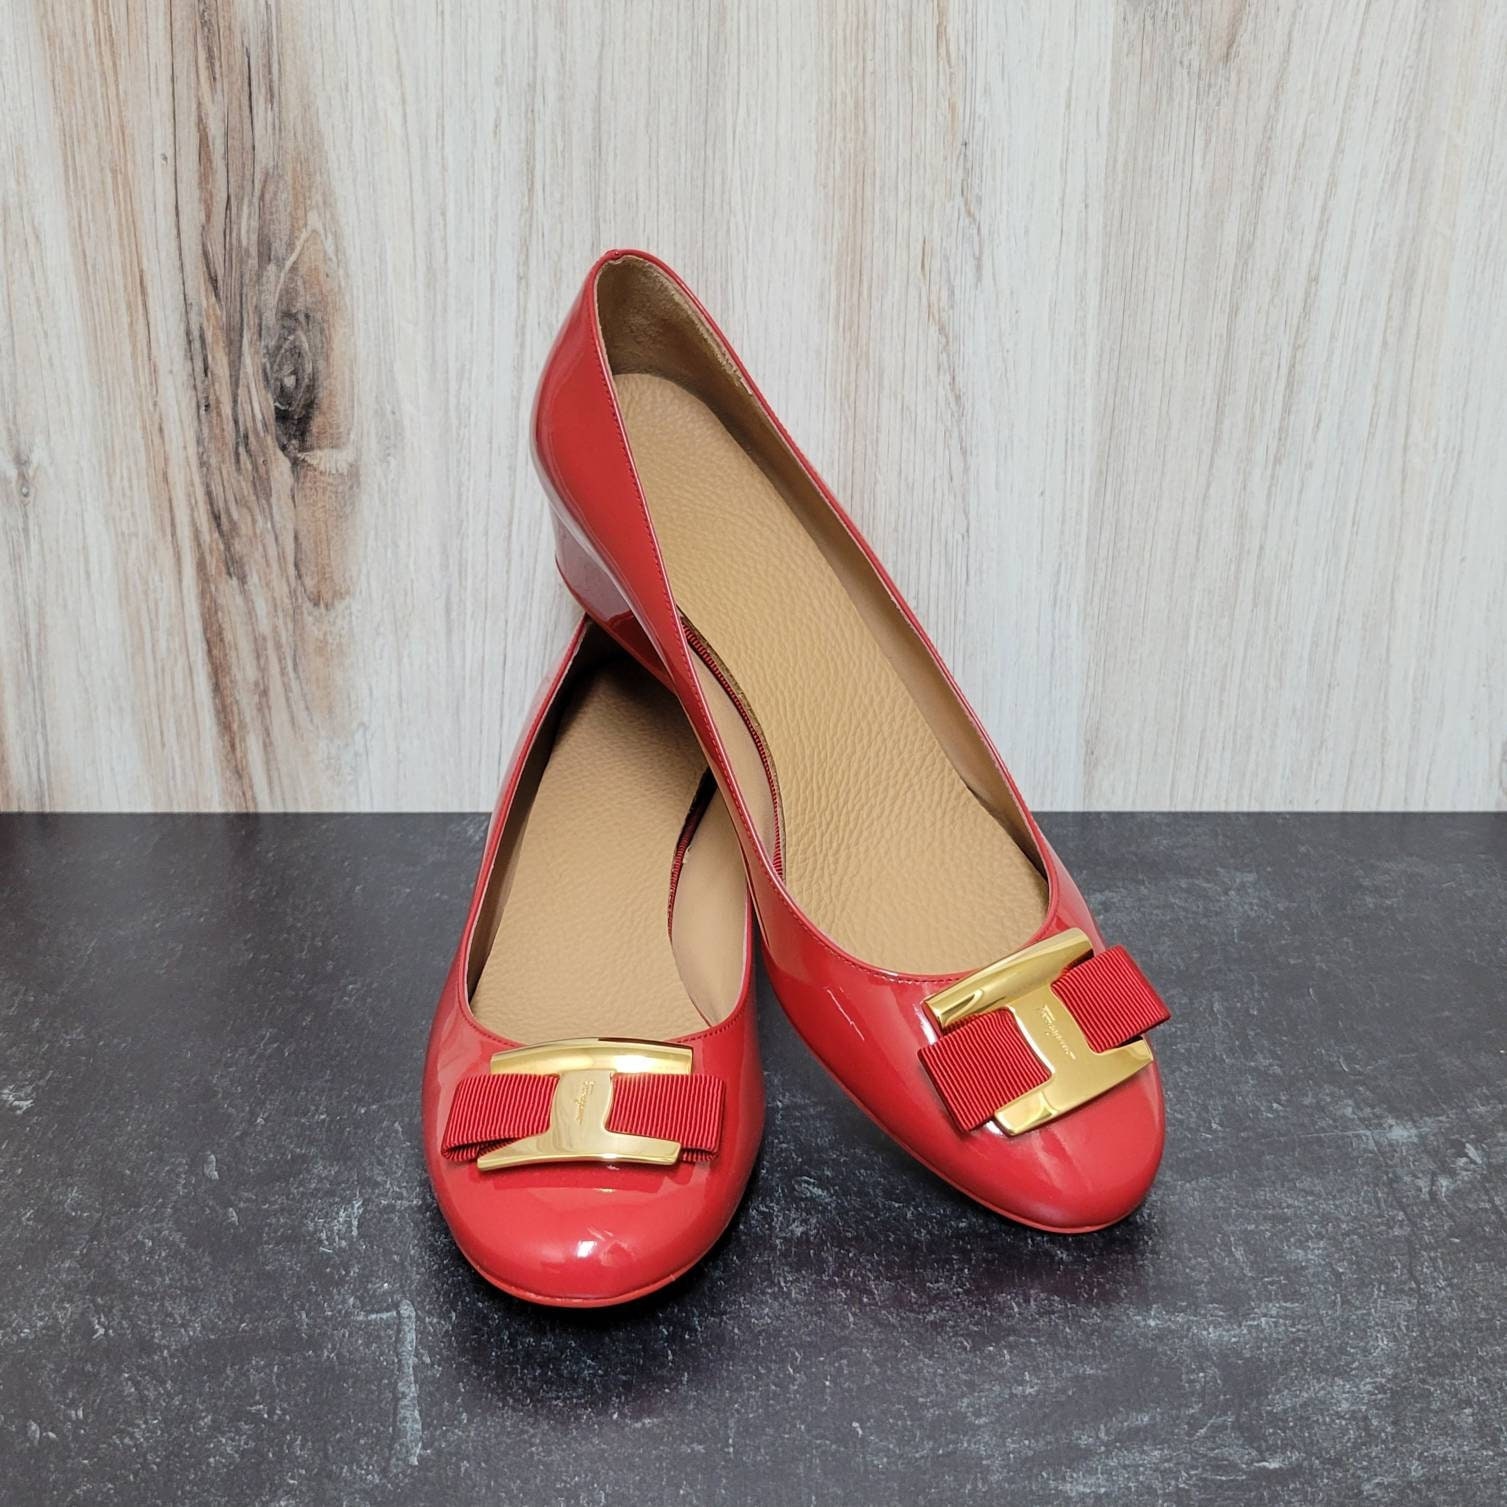 Ferragamo Low Wedge Heel Red Patent Leather Womens 11M - Etsy